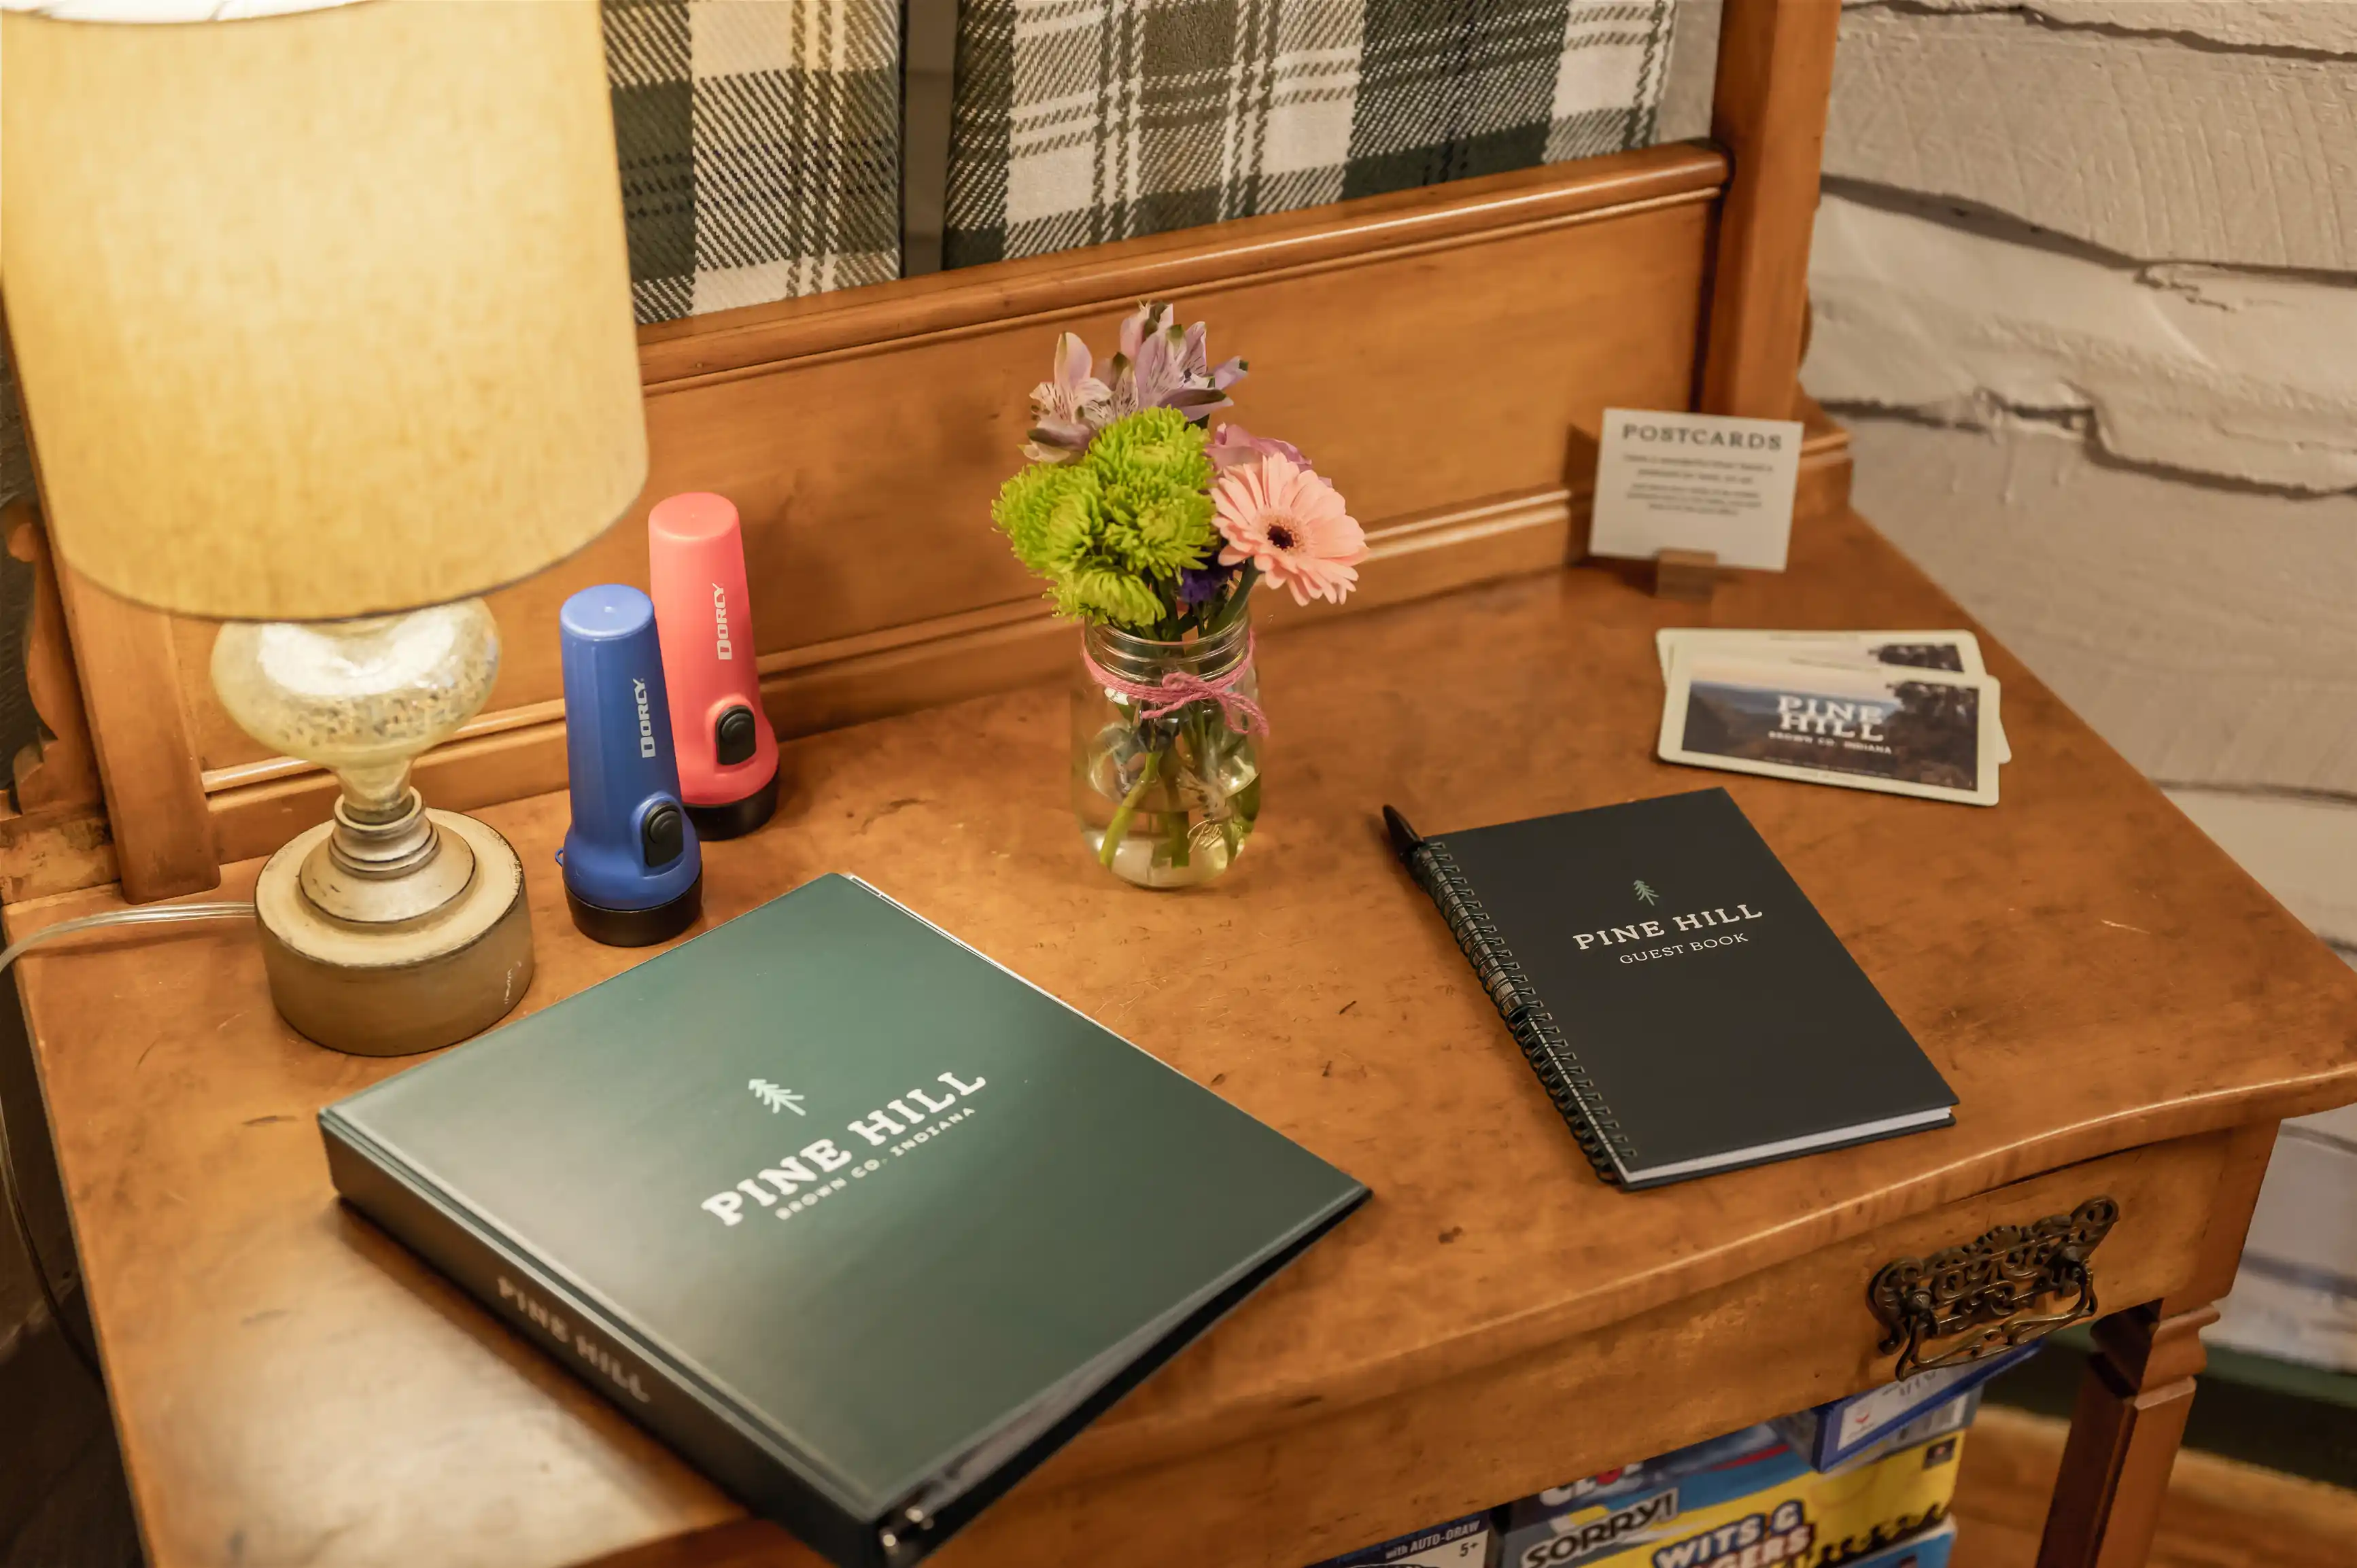 Cozy workspace with a lamp, a small vase of flowers, a green book titled "My Wellness Journal," a black book titled "Work Plan," and some pens on a wooden desk.